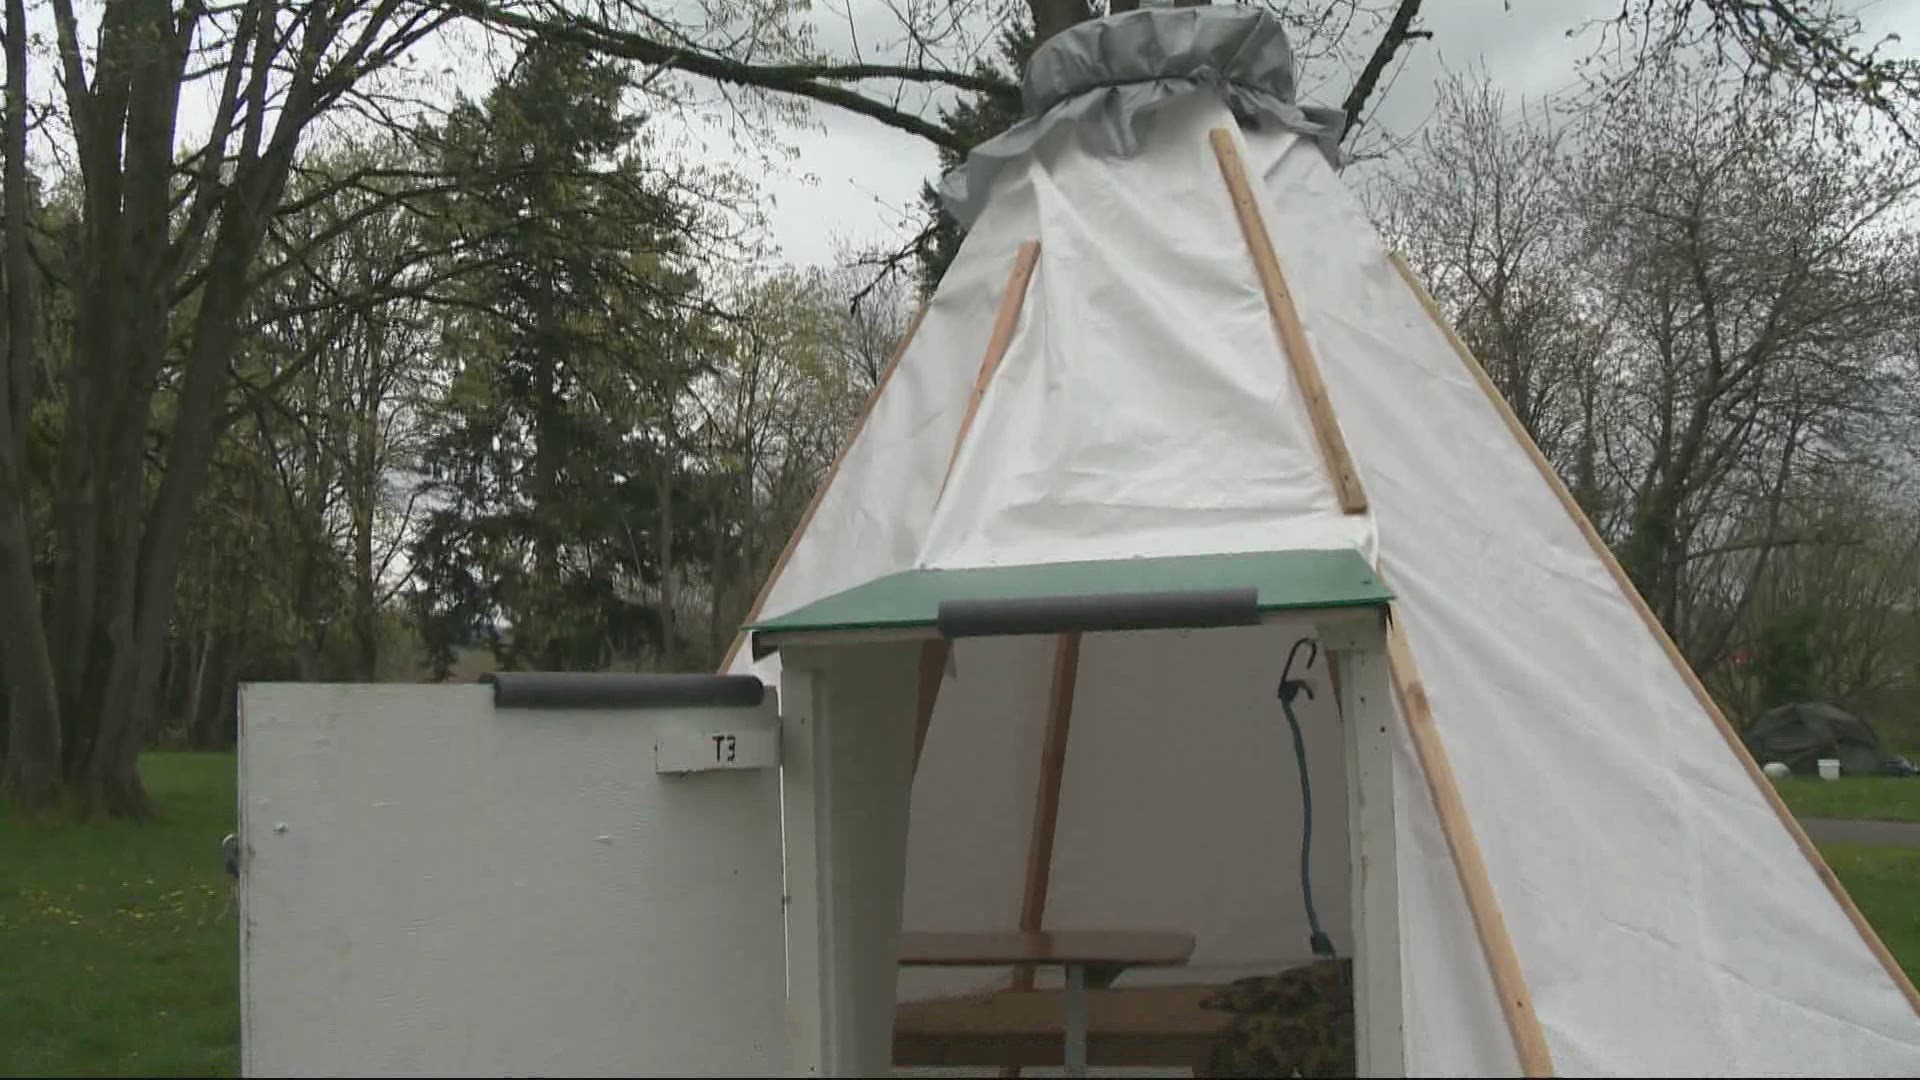 A new alternative to shelters and affordable housing is popping up in North Portland.